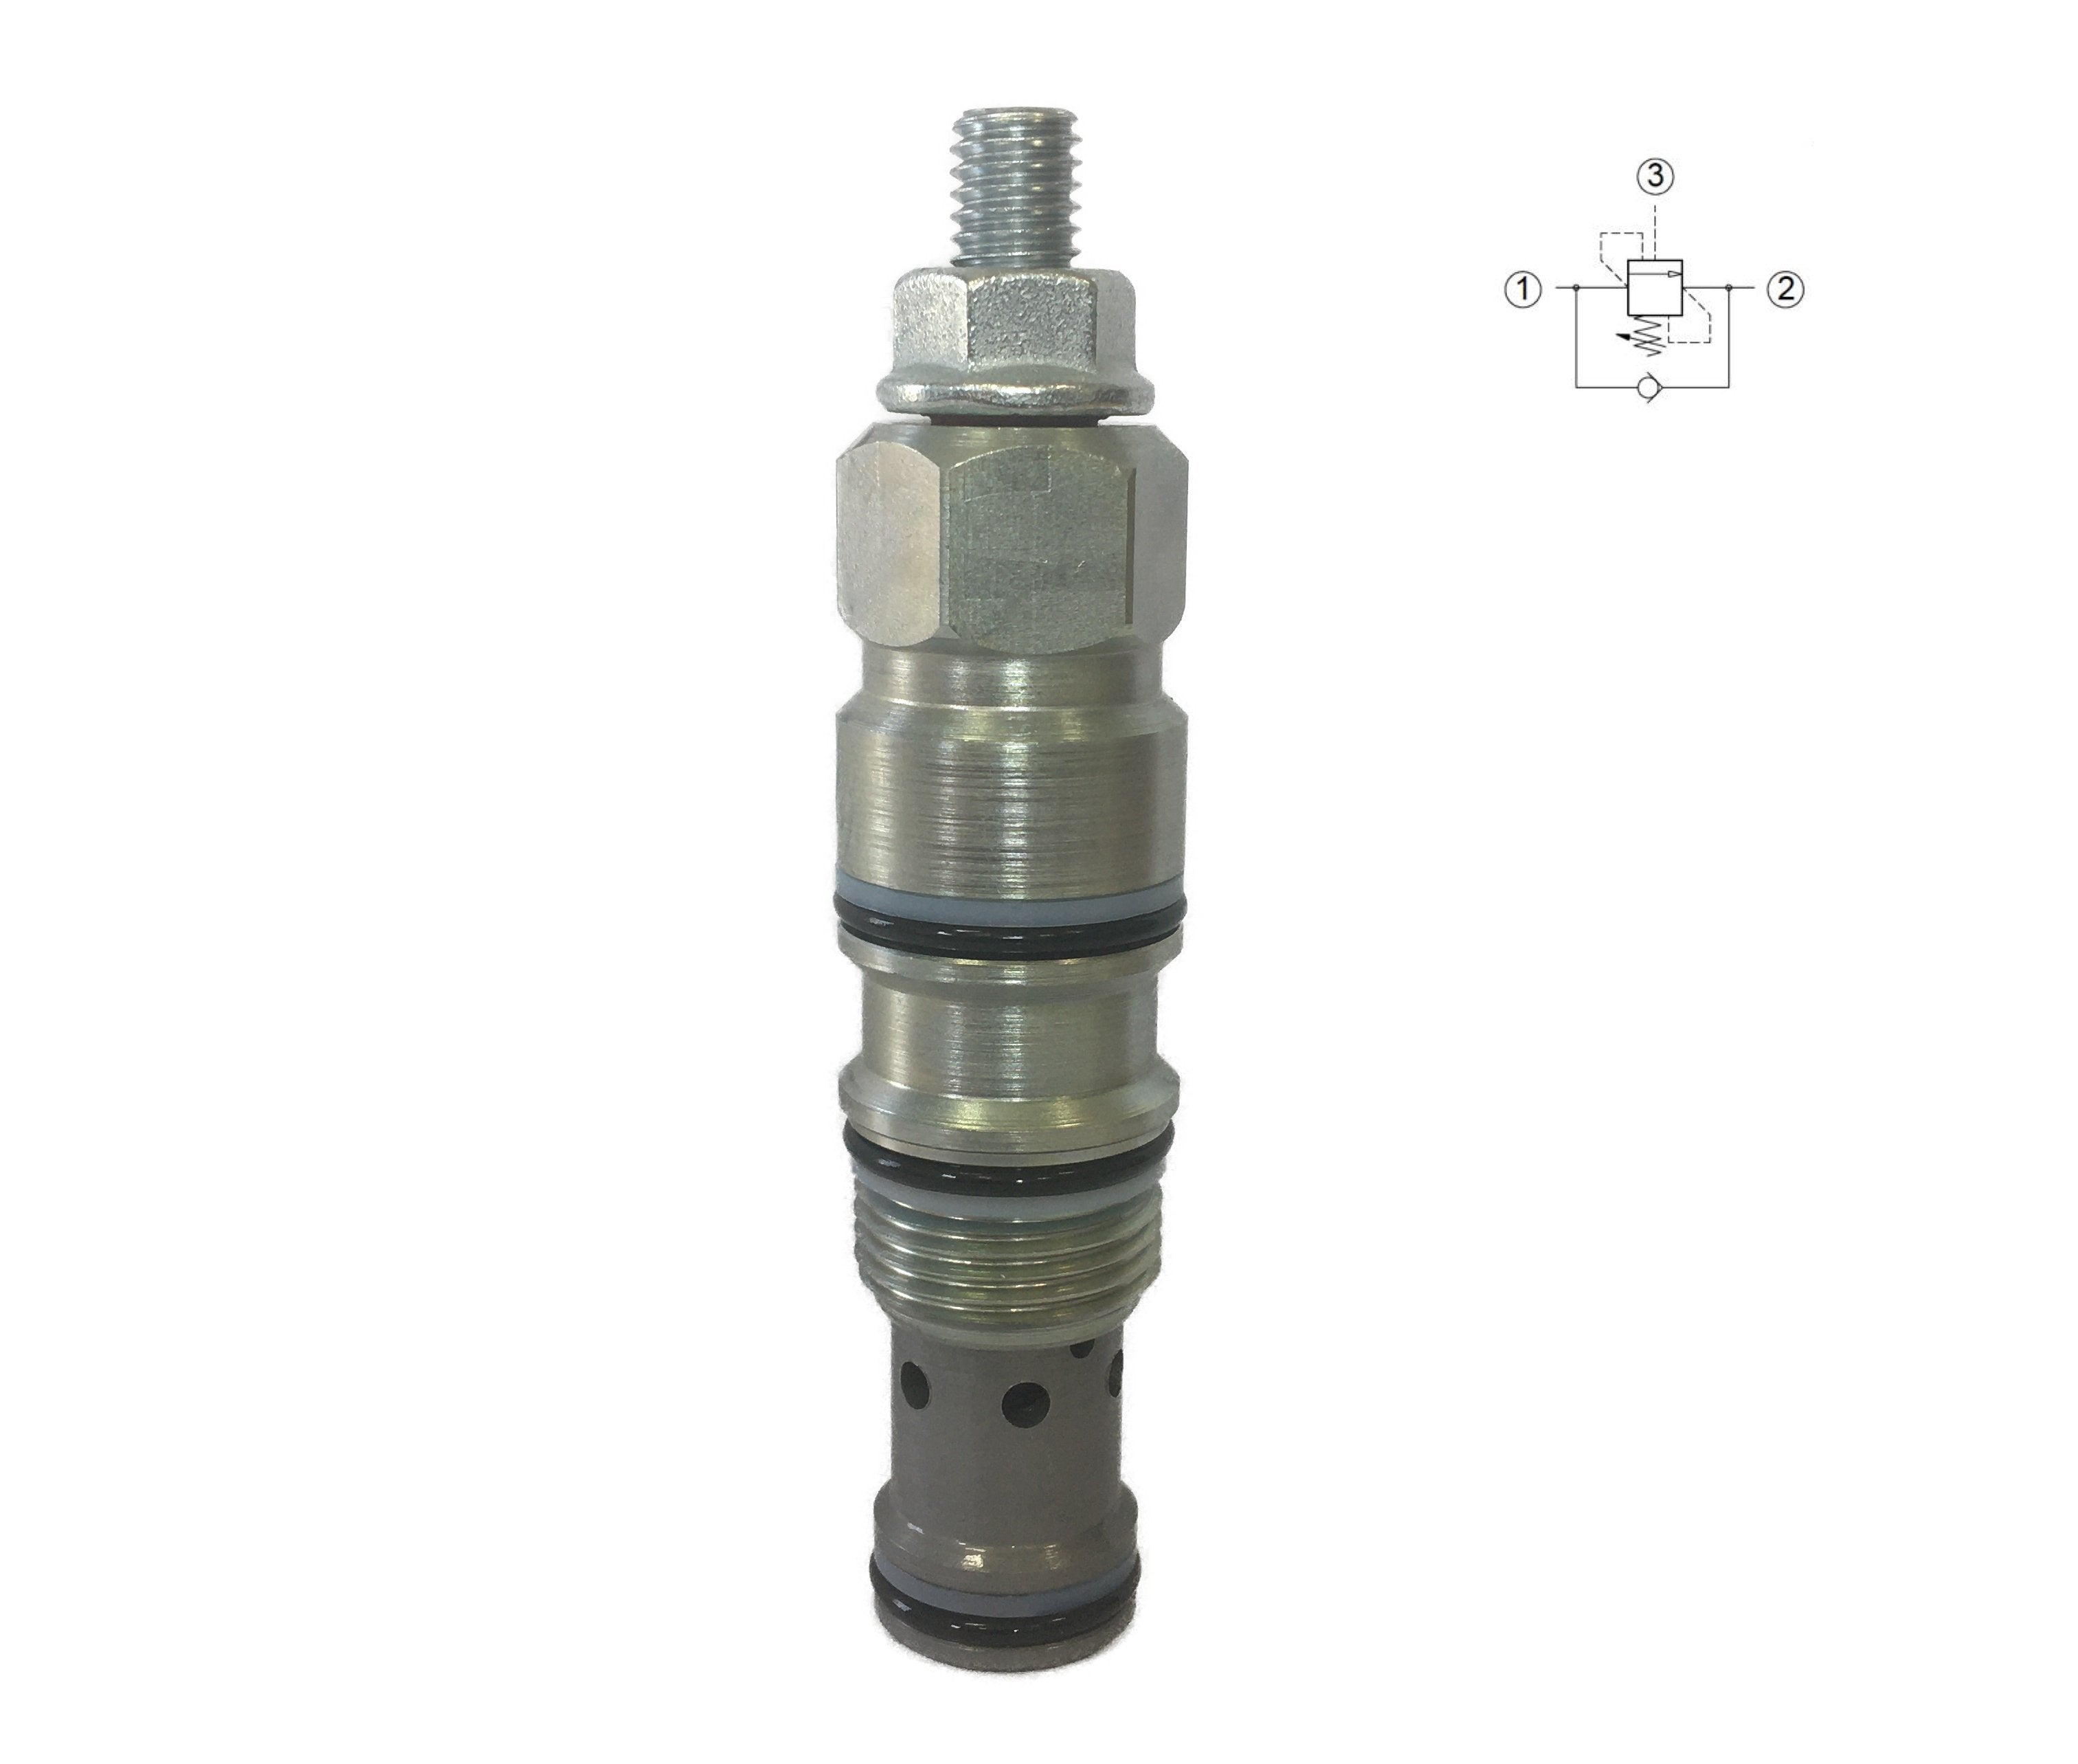 C200D250031100A : Valvole Counterbalance, 3:1, 20 GPM, 5000psi, 2030 to 3842psi adjustable, 3625psi Preset, T-11A